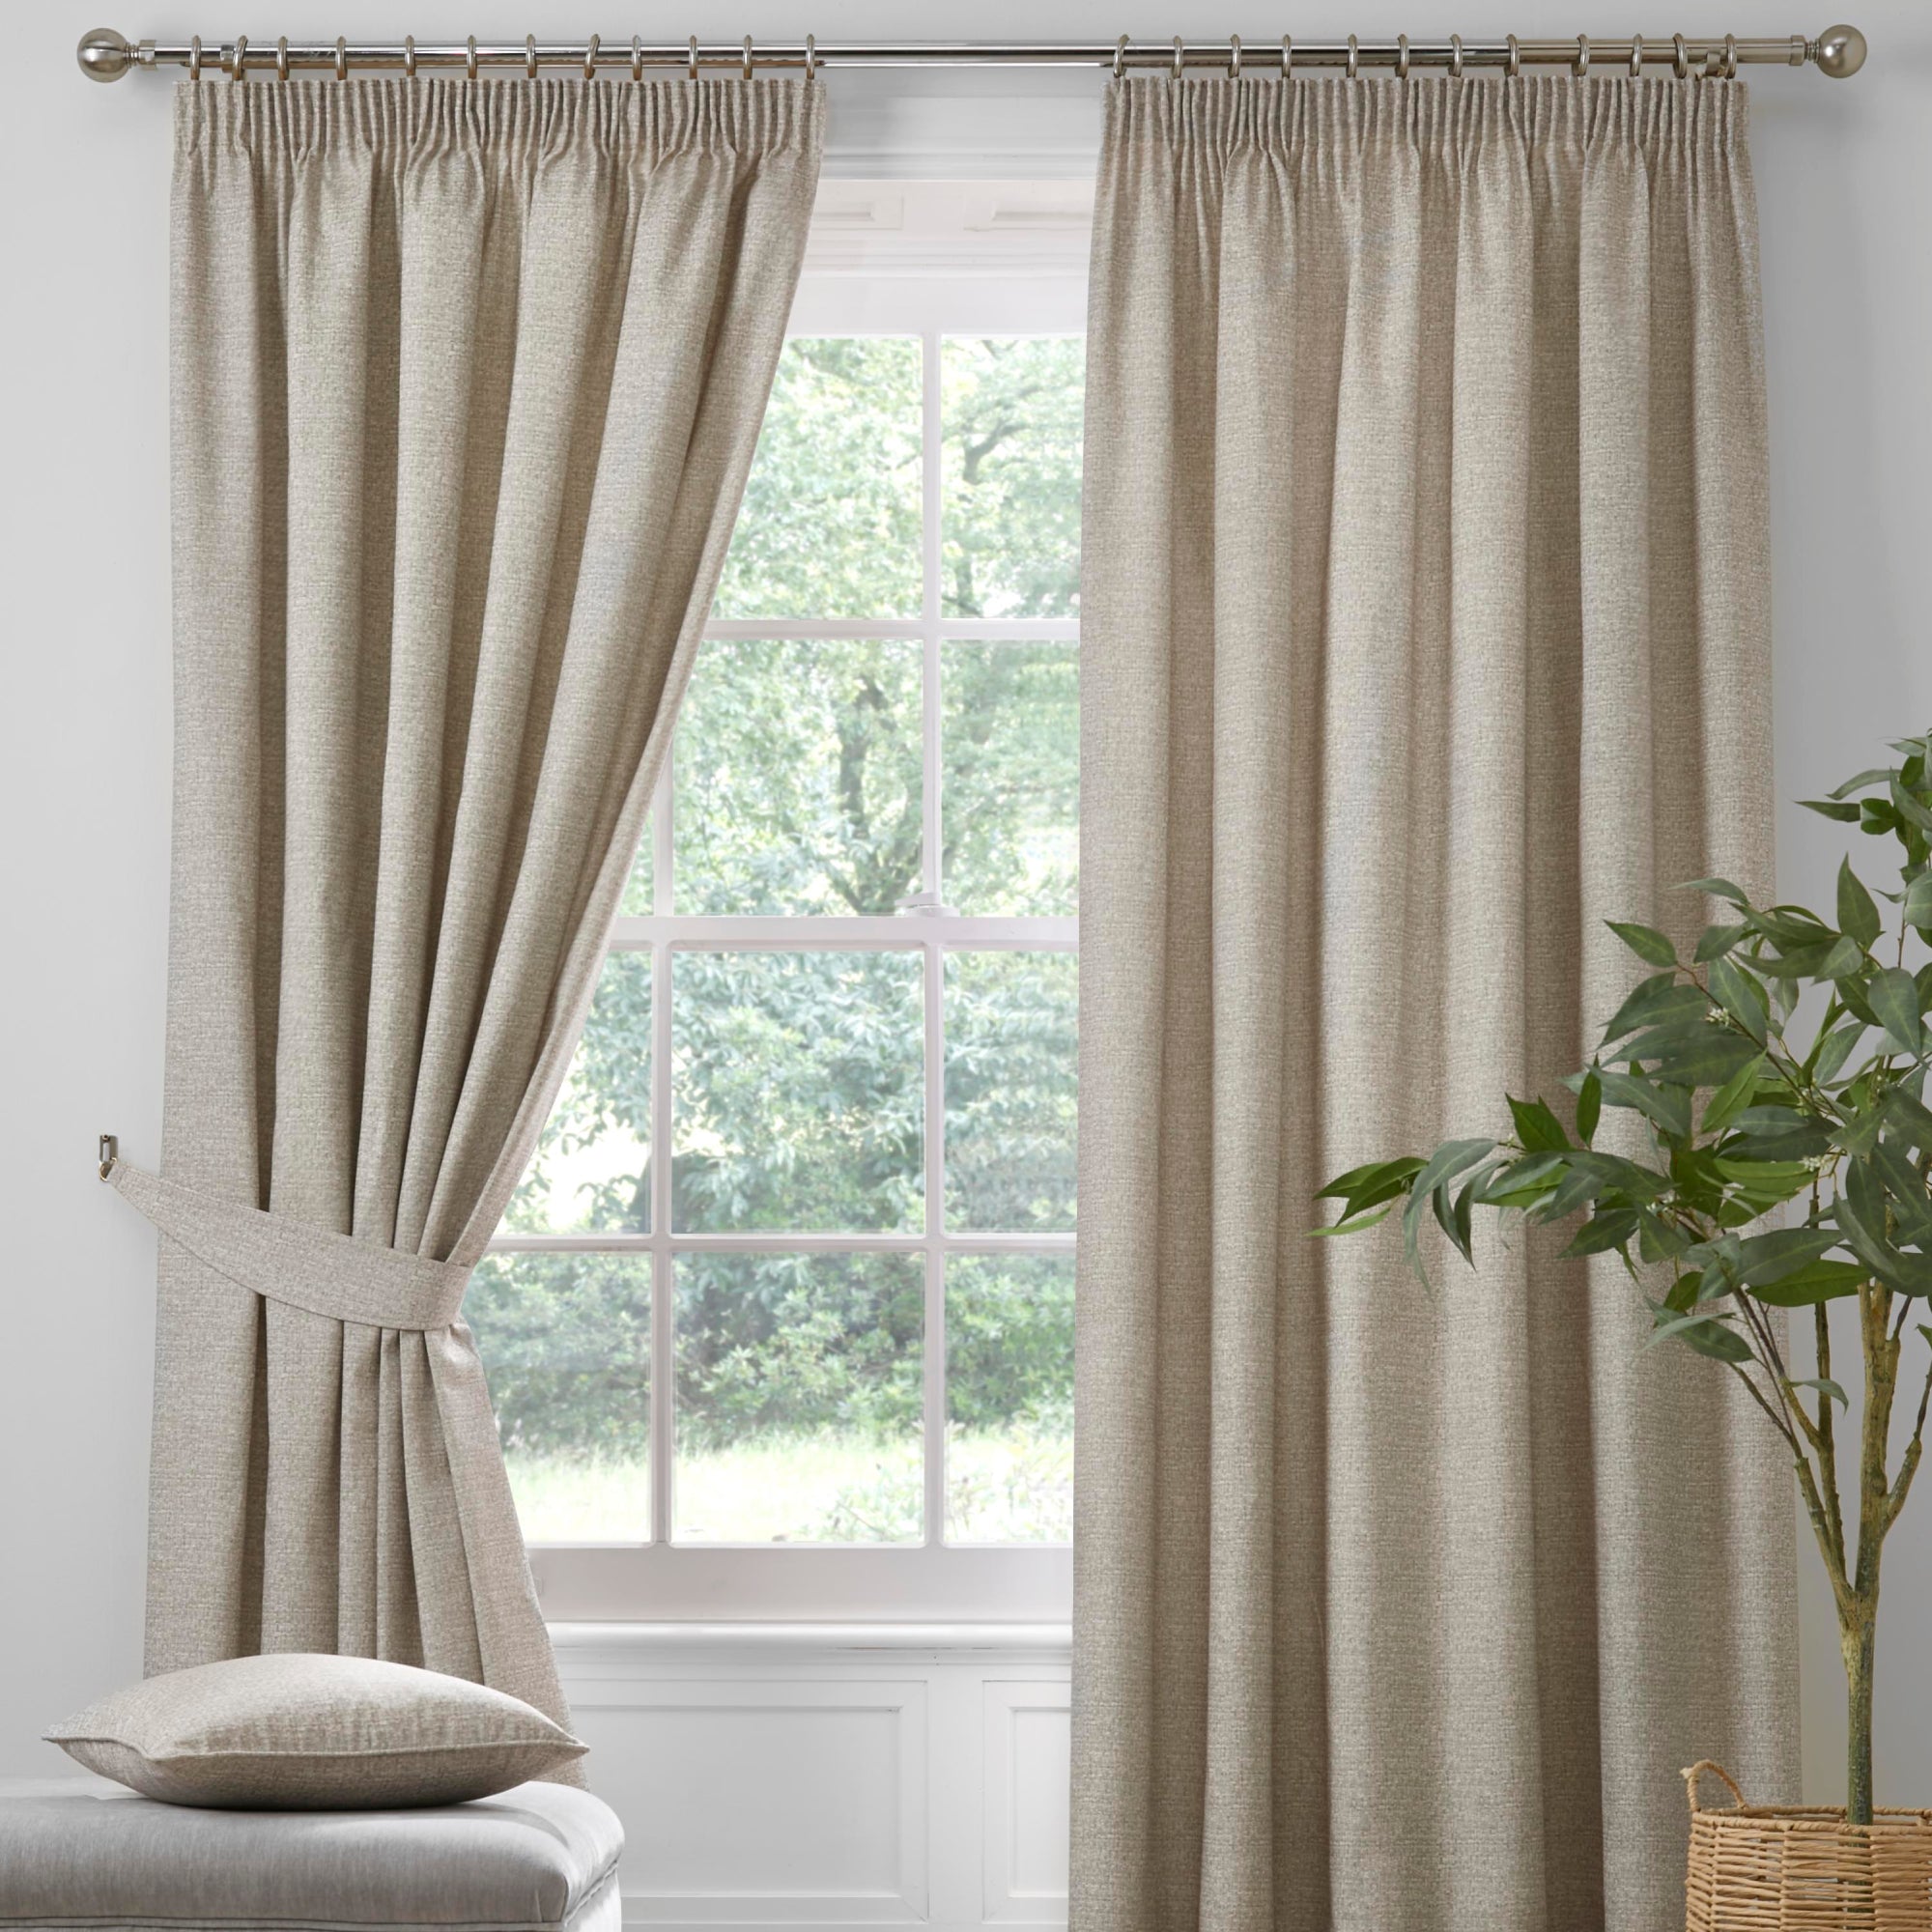 Pair of Pencil Pleat Curtains With Tie-Backs Pembrey by D&D in Natural